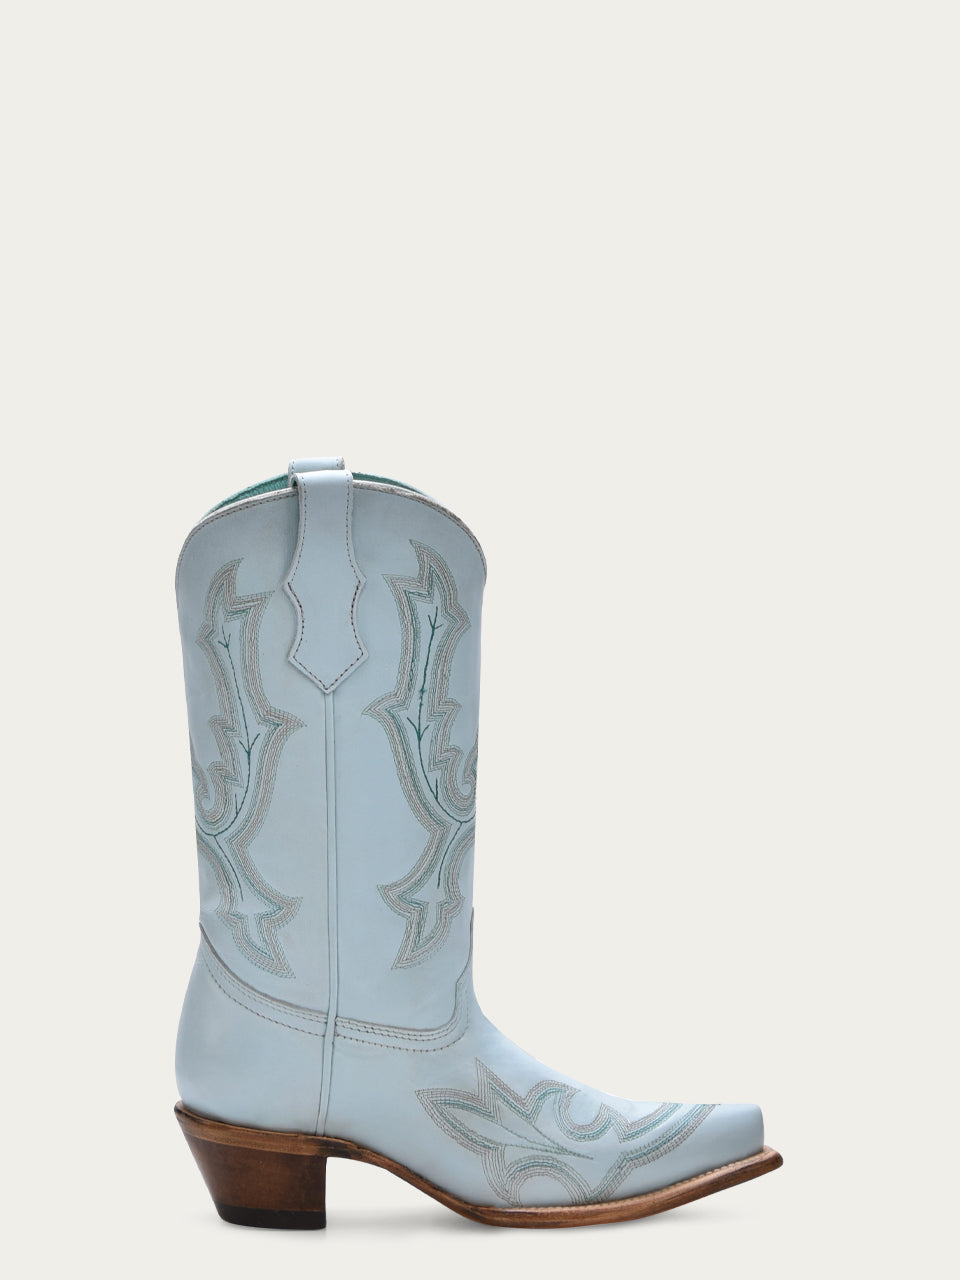 T0174 - TEEN'S BLUE EMBROIDERY SNIP-TOE COWBOY BOOT